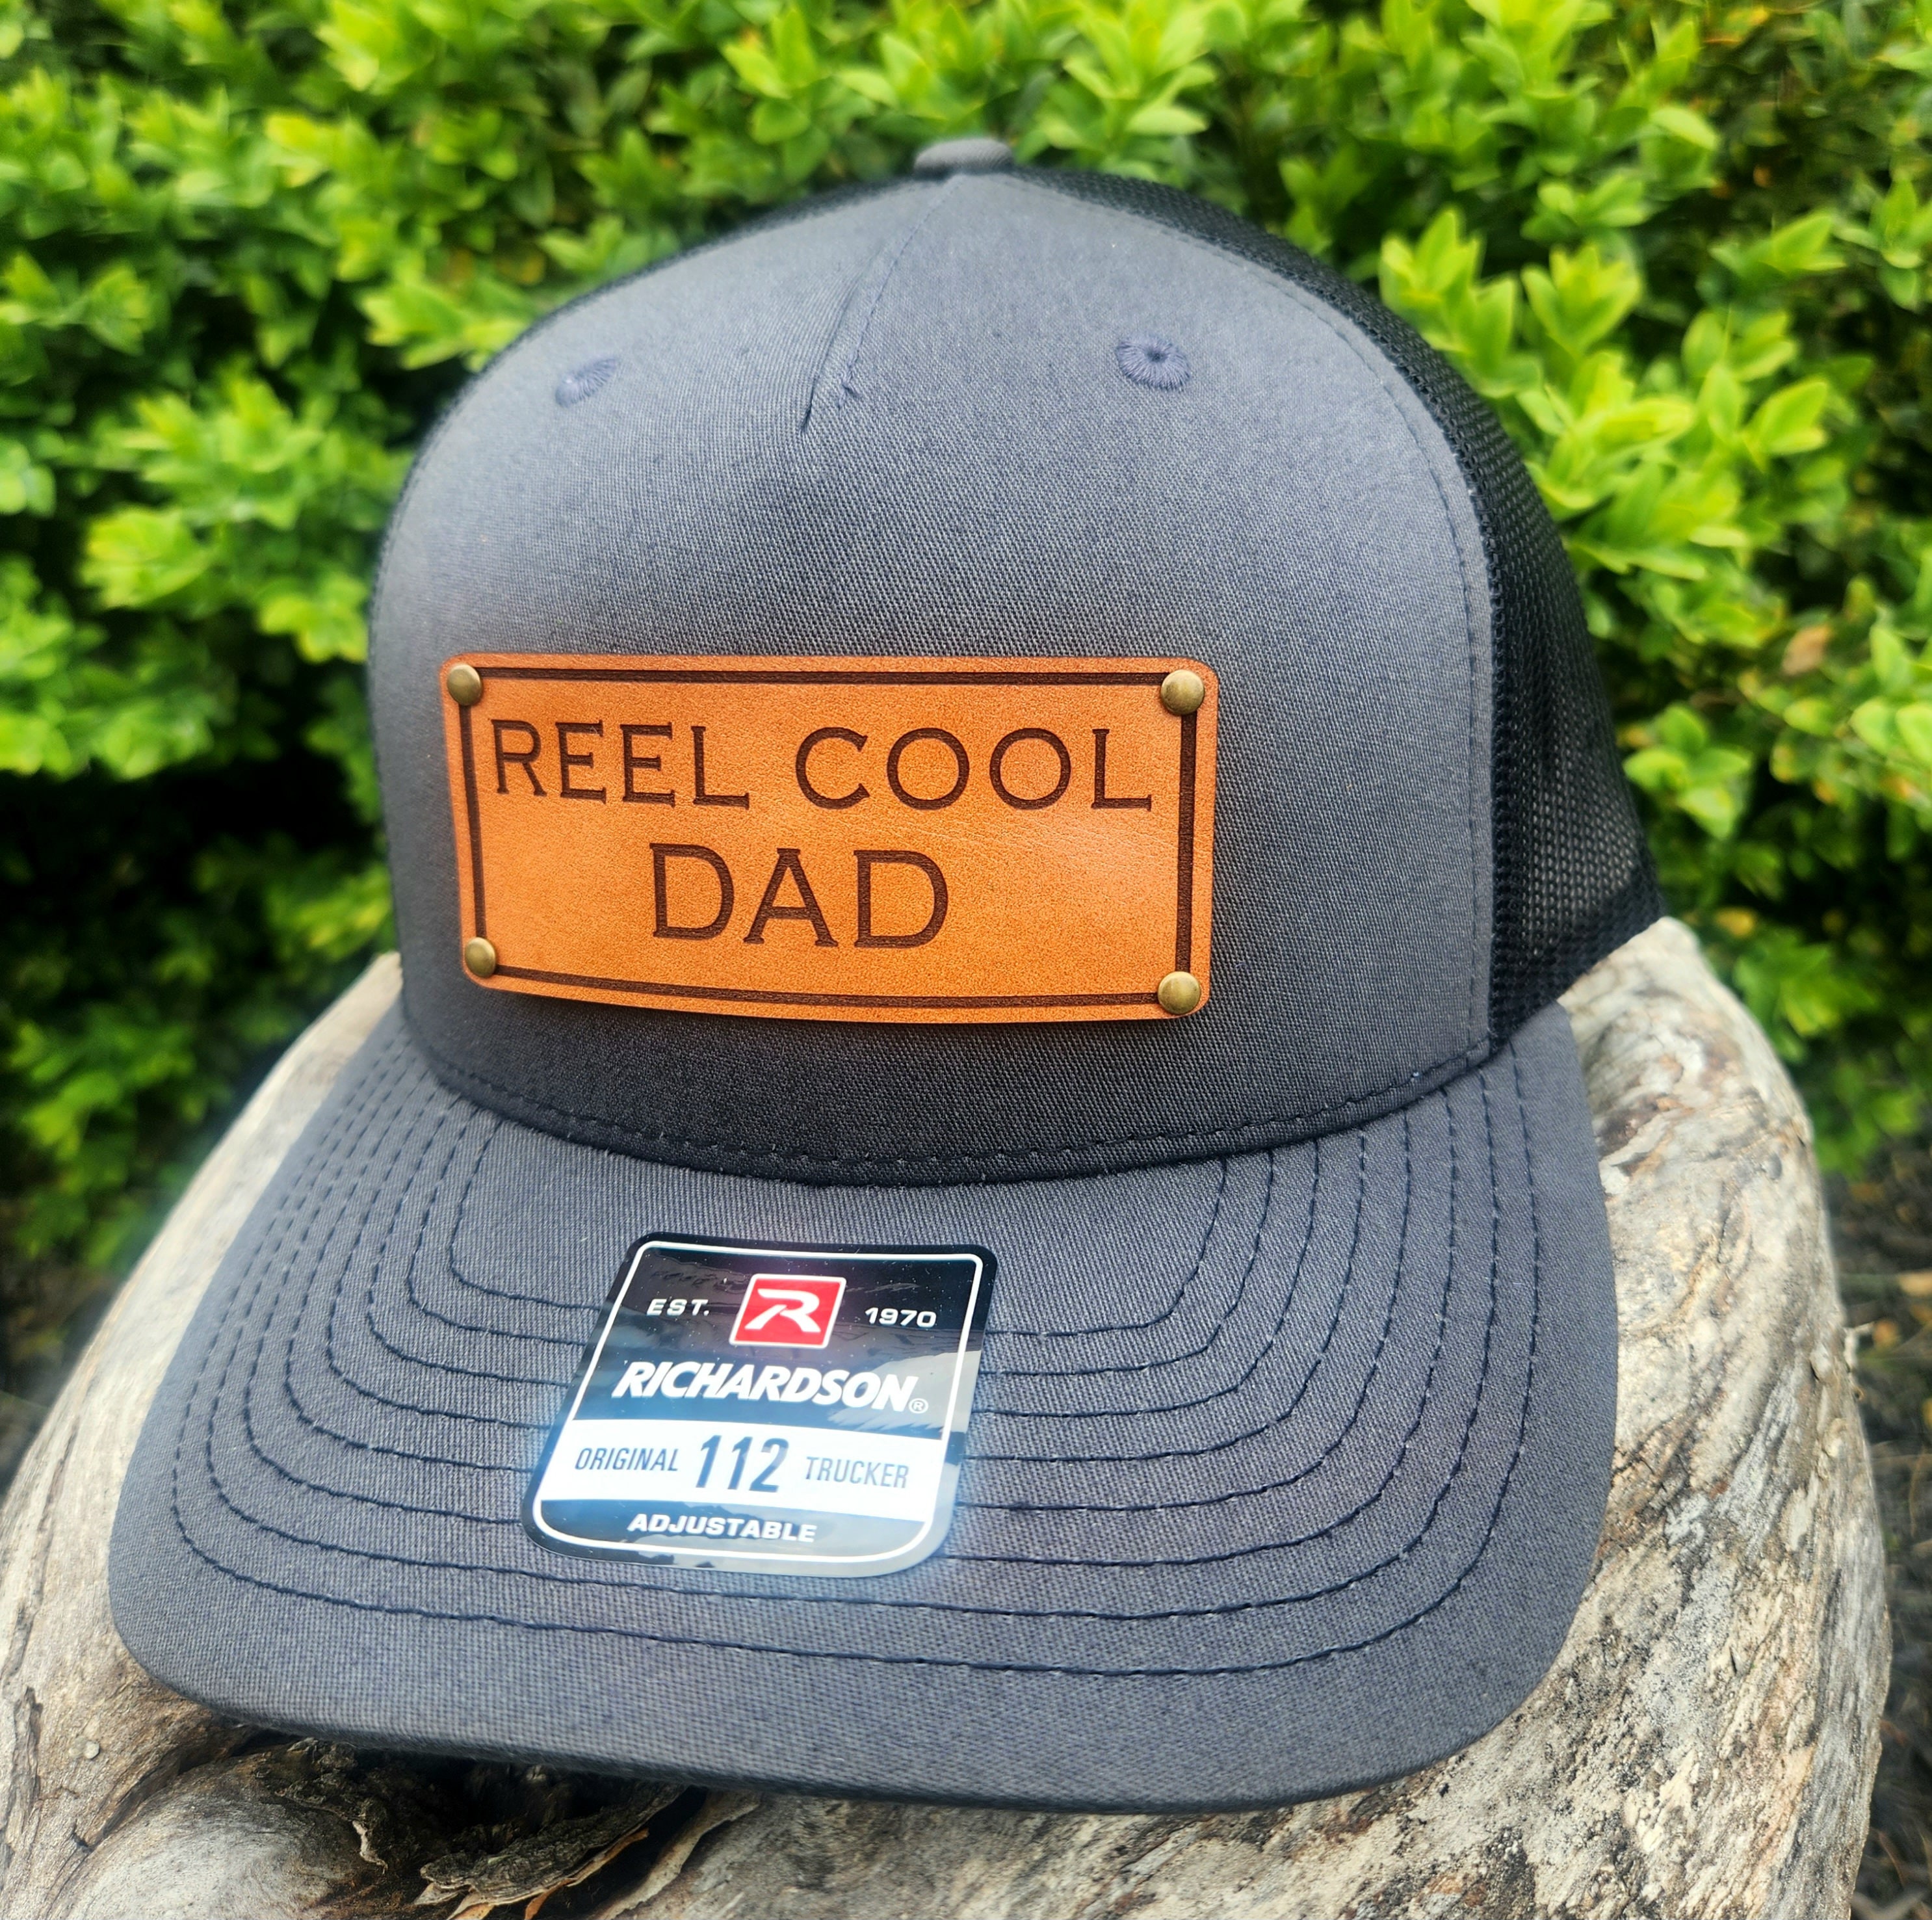 REEL COOL DAD Hat Fishing Hat Hat for Dad Gift for Him Reel Cool